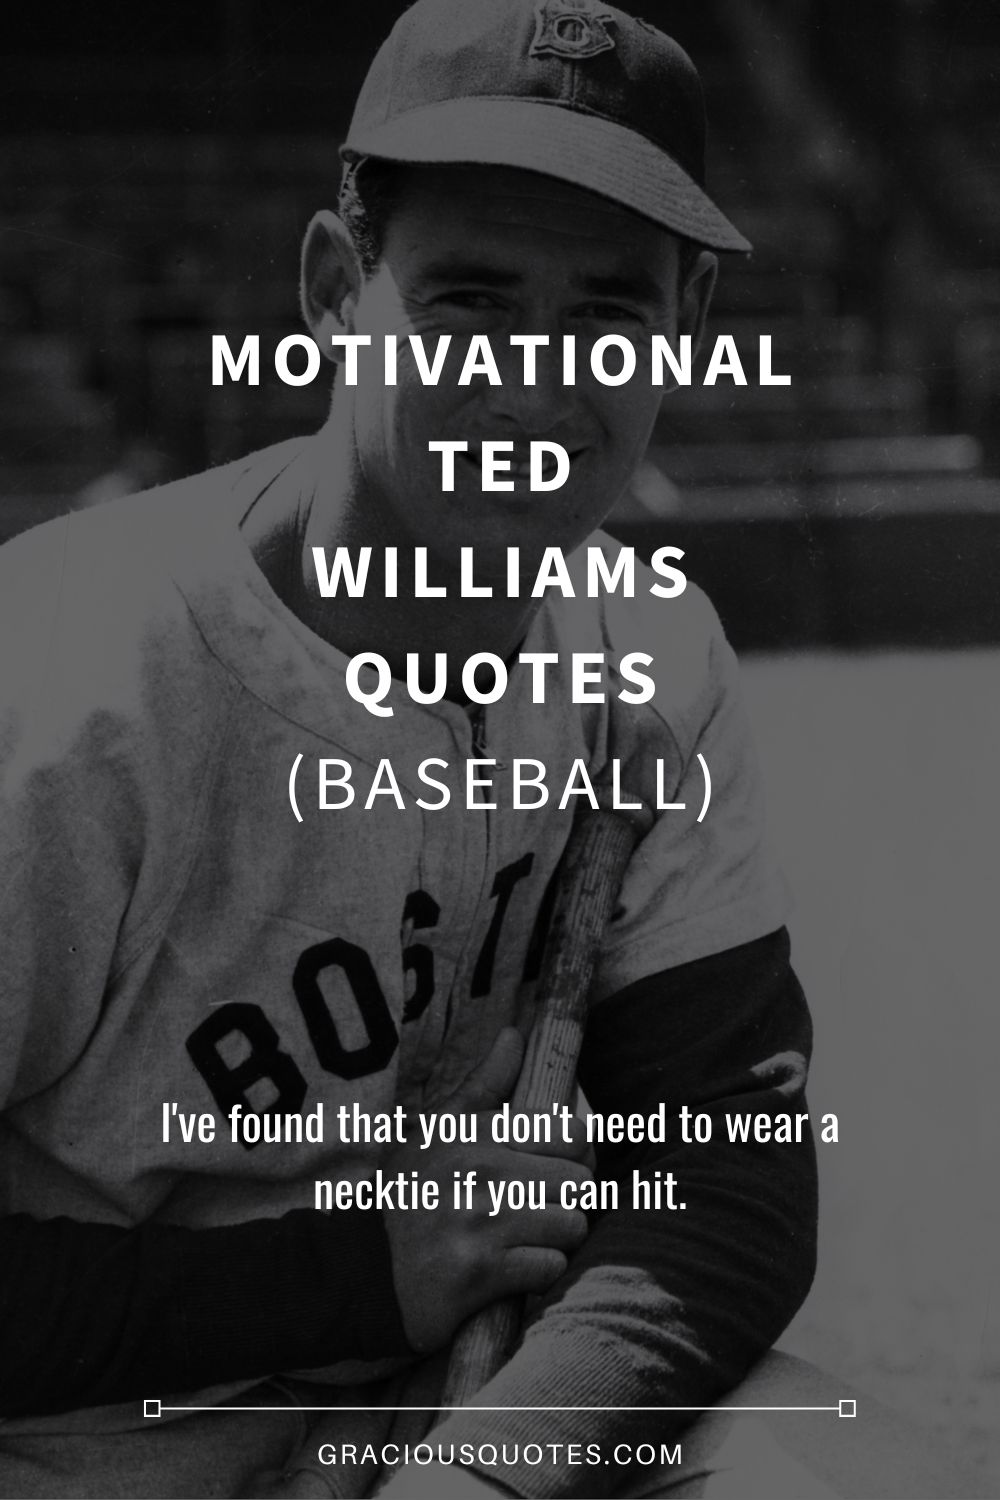 Motivational Ted Williams Quotes (BASEBALL) - Gracious Quotes